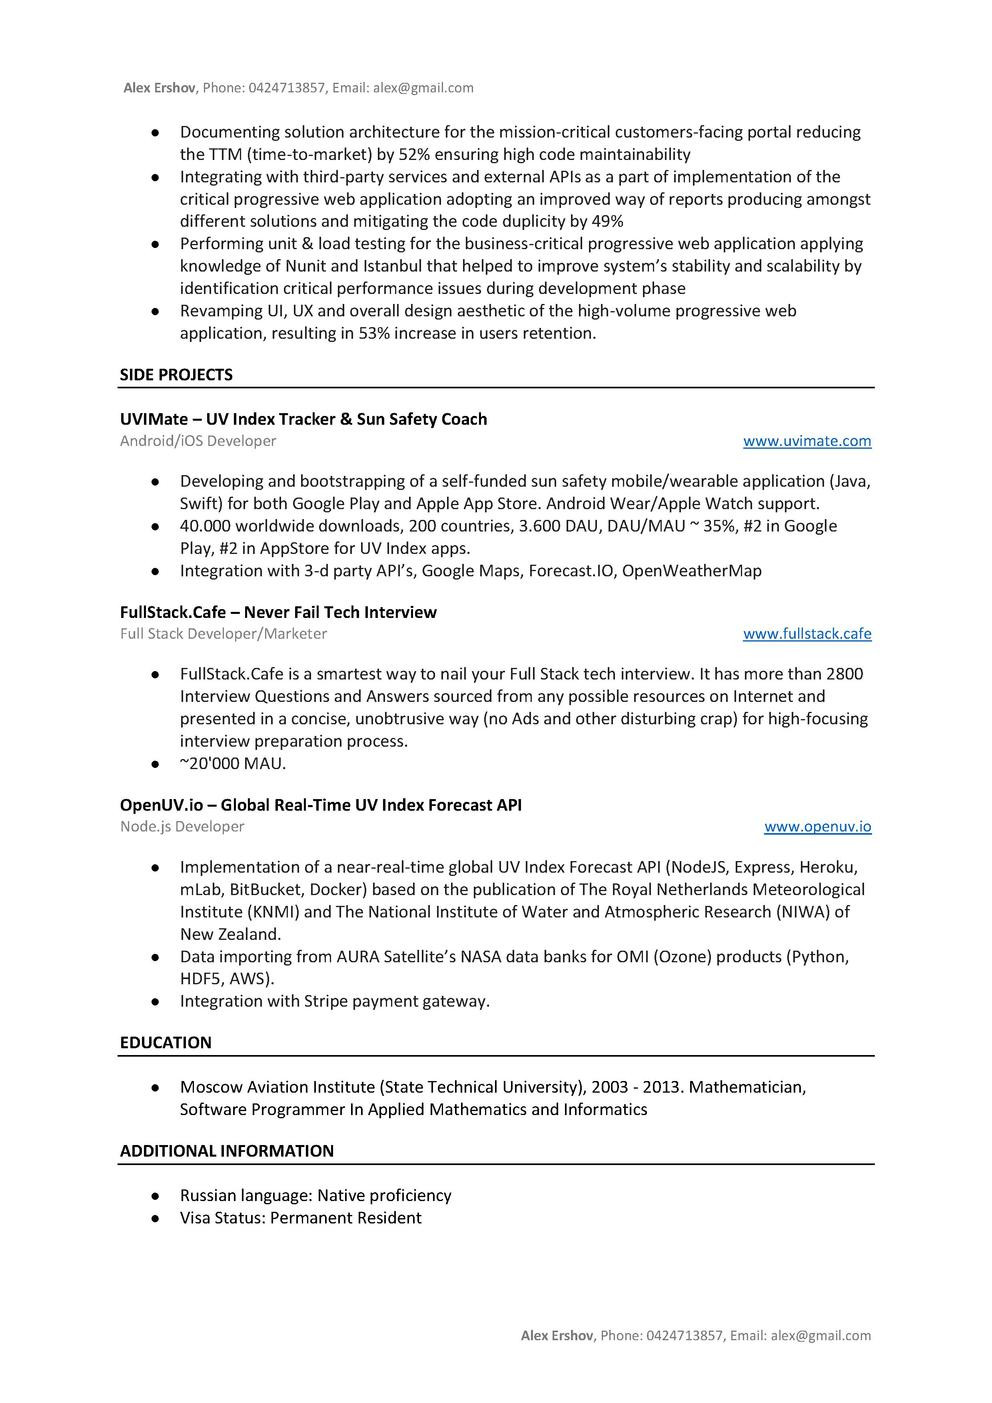 Net Full Time Resumes with 6 Months Experience Samples Github – Aershov24/101-developer-resume-cv-templates: the Only …